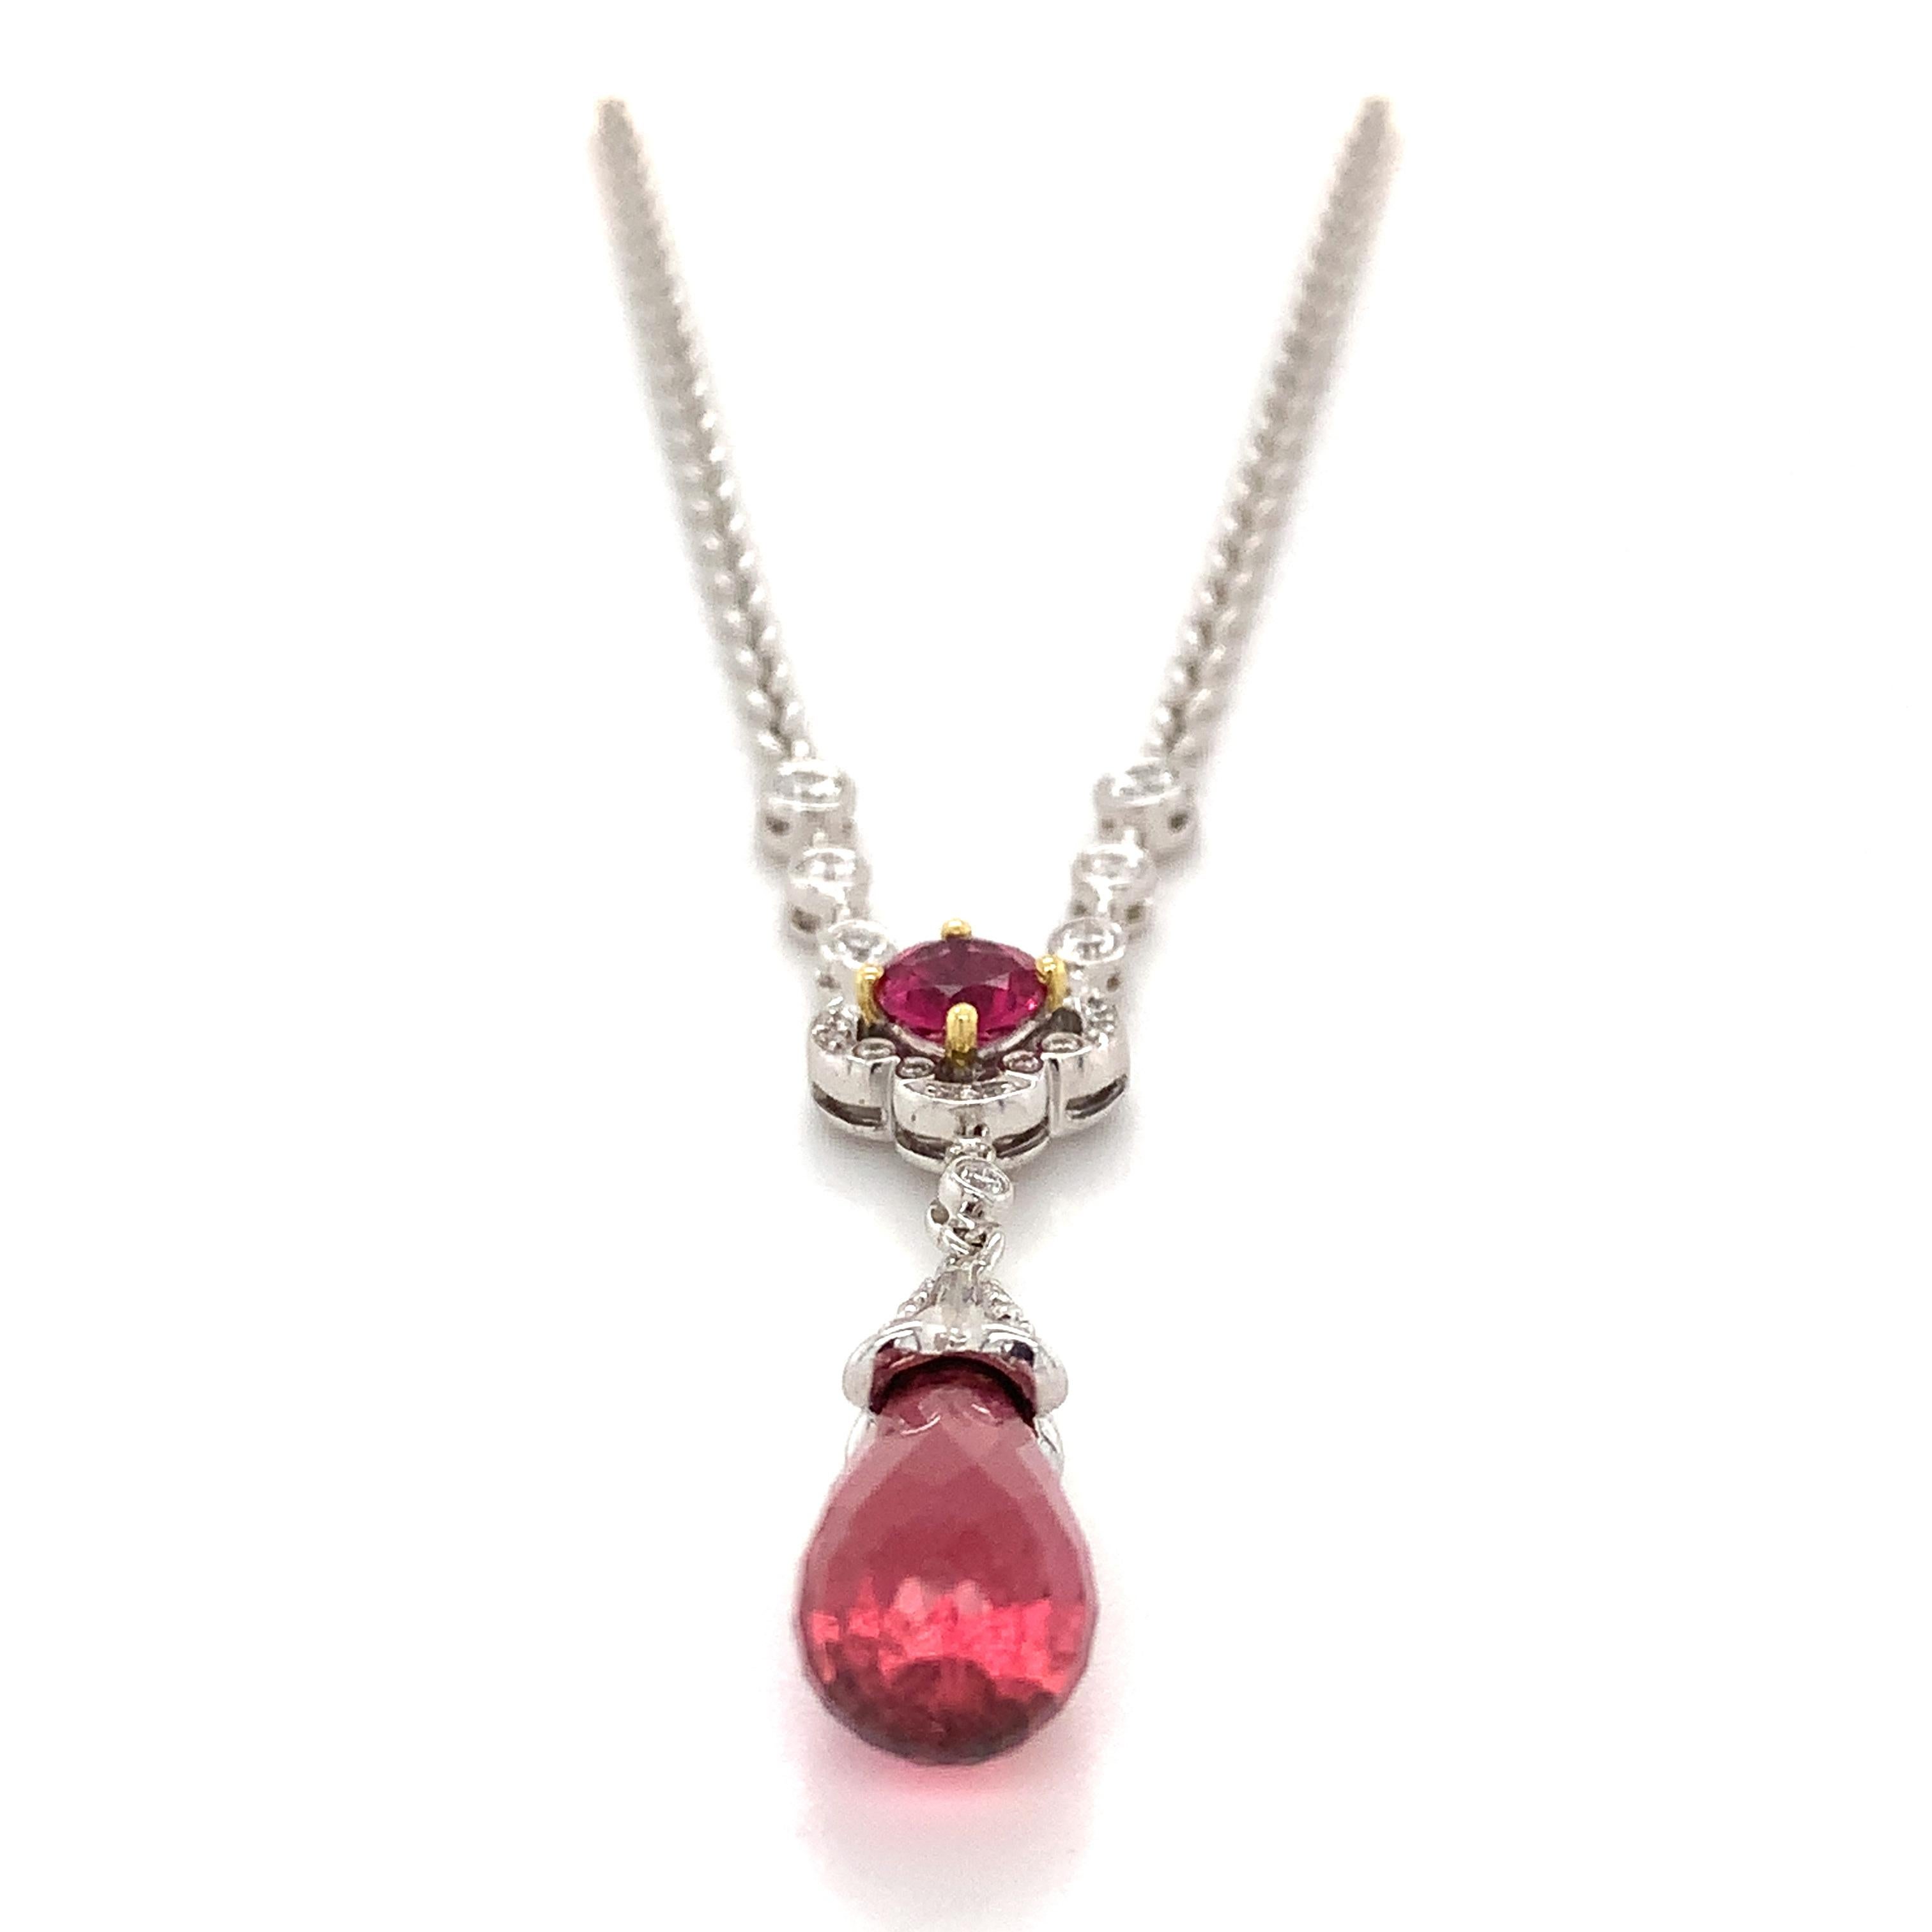 18k White Gold Pink Tourmaline And Diamond Pendant
11.6 Grams
Pink Rubies 4.76 Carats Total Weight
Round White Diamonds .4 Carats Total Weight
This is a beautiful 18k white gold ruby and diamond necklace. This necklace is created by Charles Krypell.